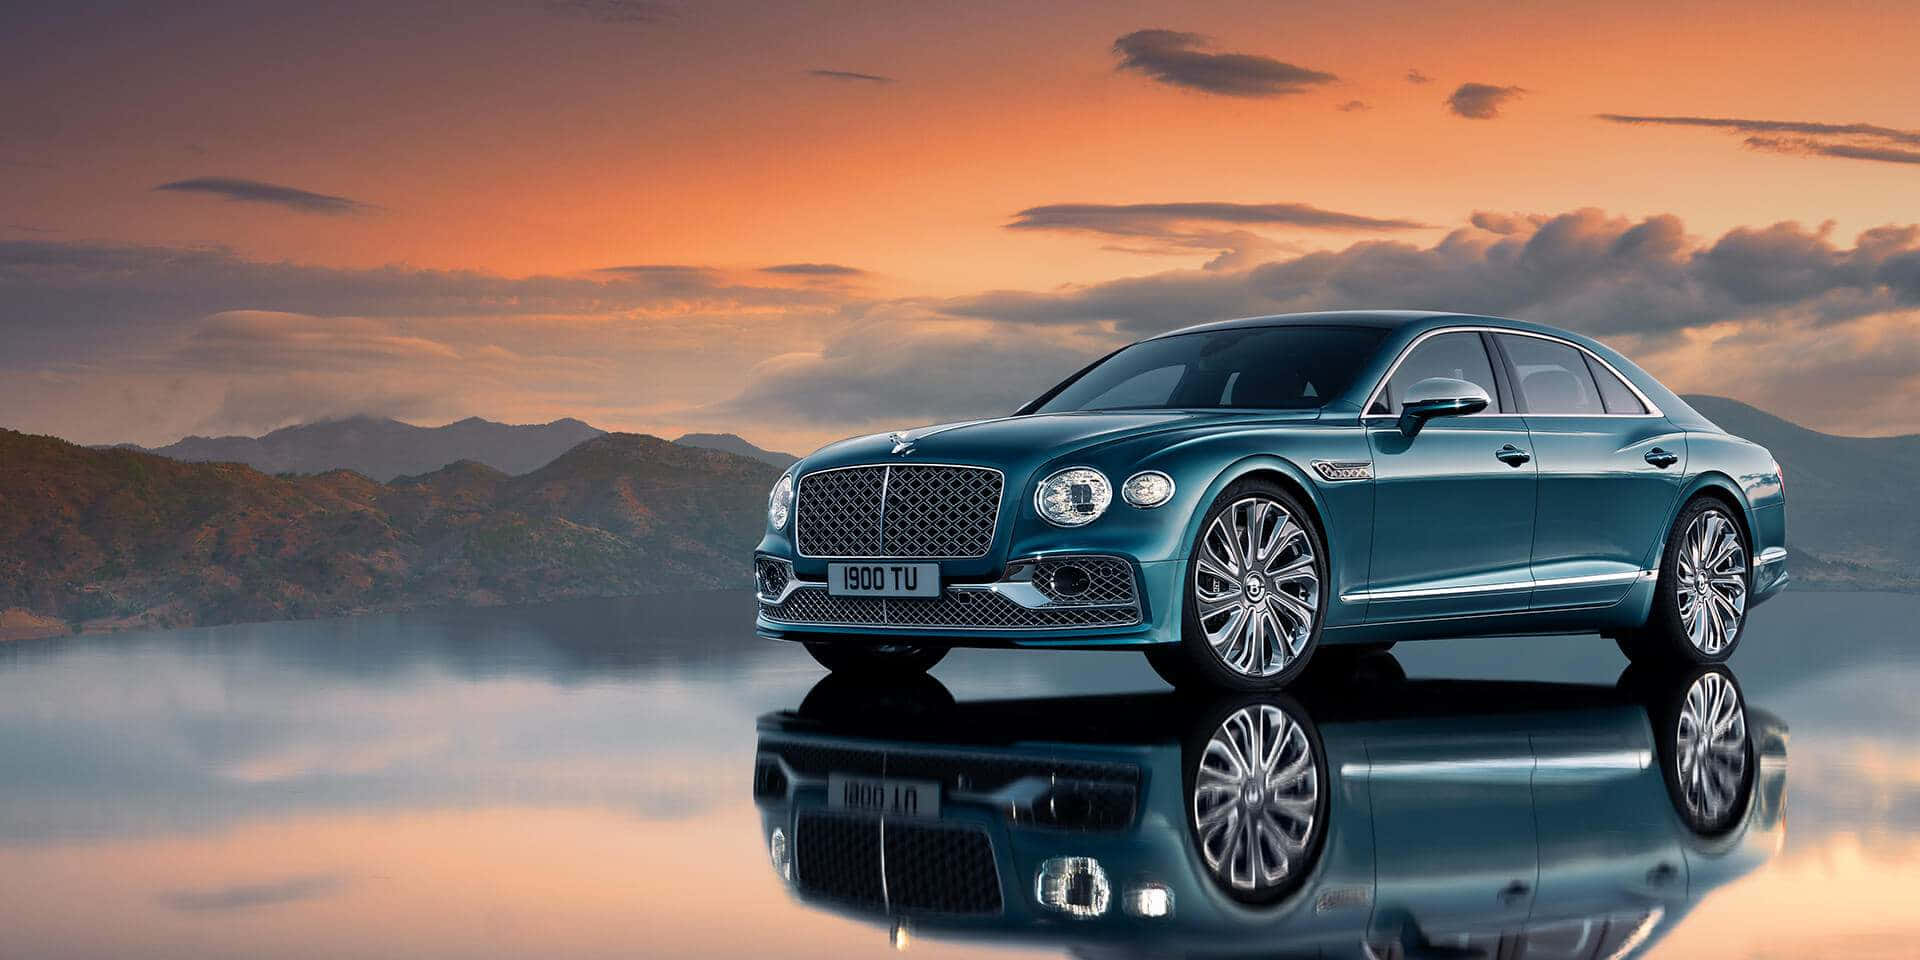 Experience the luxurious pleasure behind the wheel of a Bentley